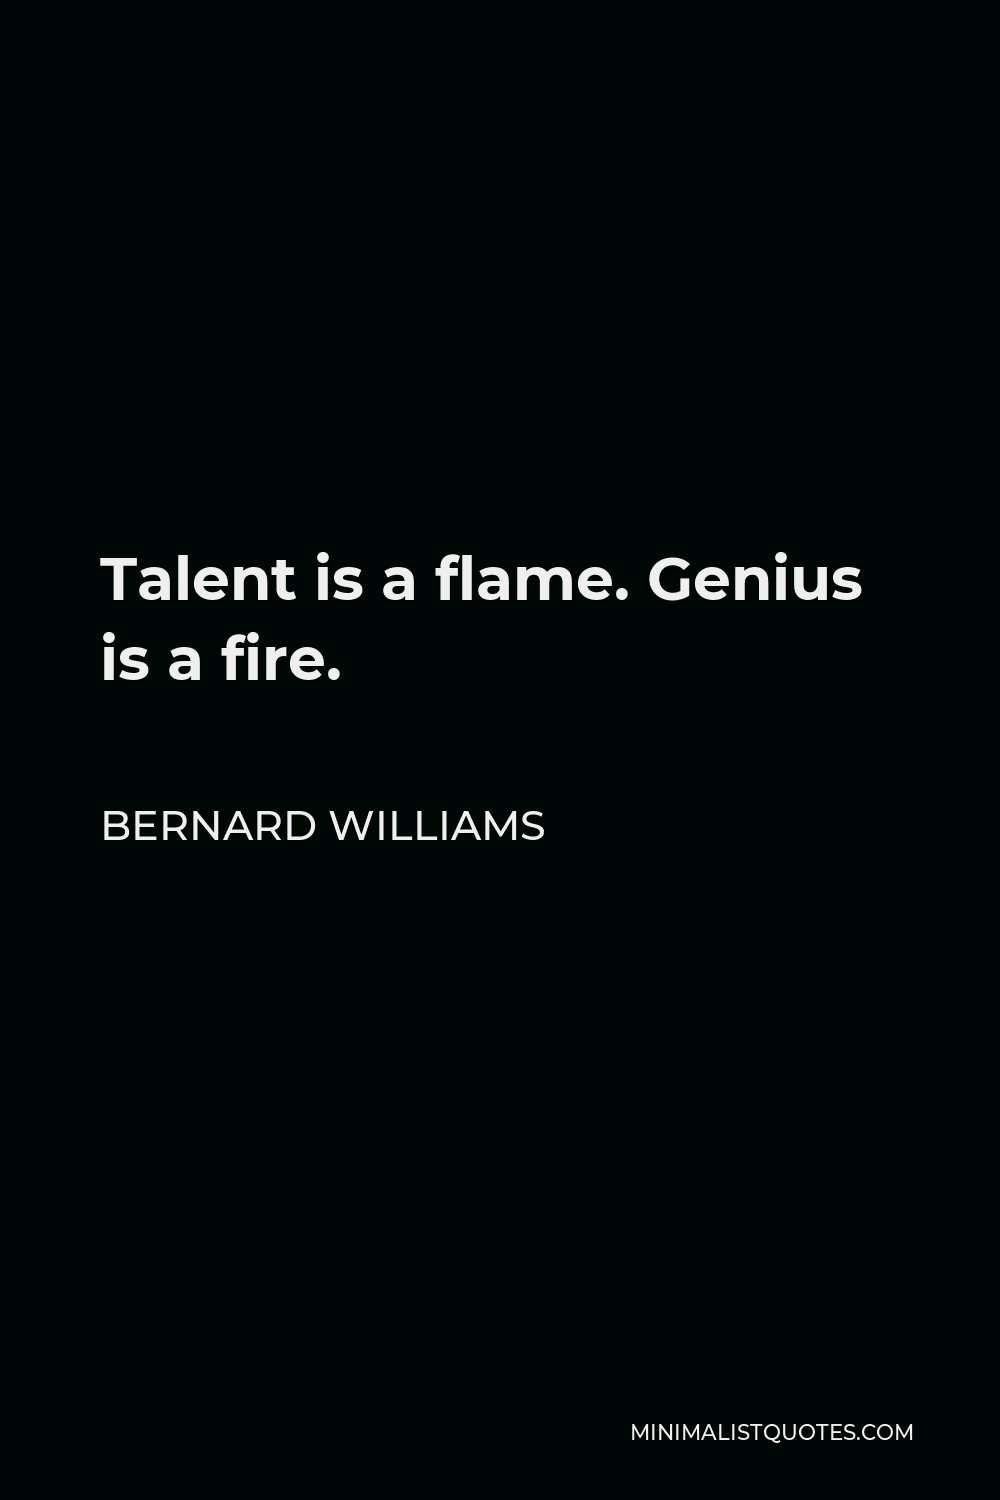 Bernard Williams Quote - Talent is a flame. Genius is a fire.